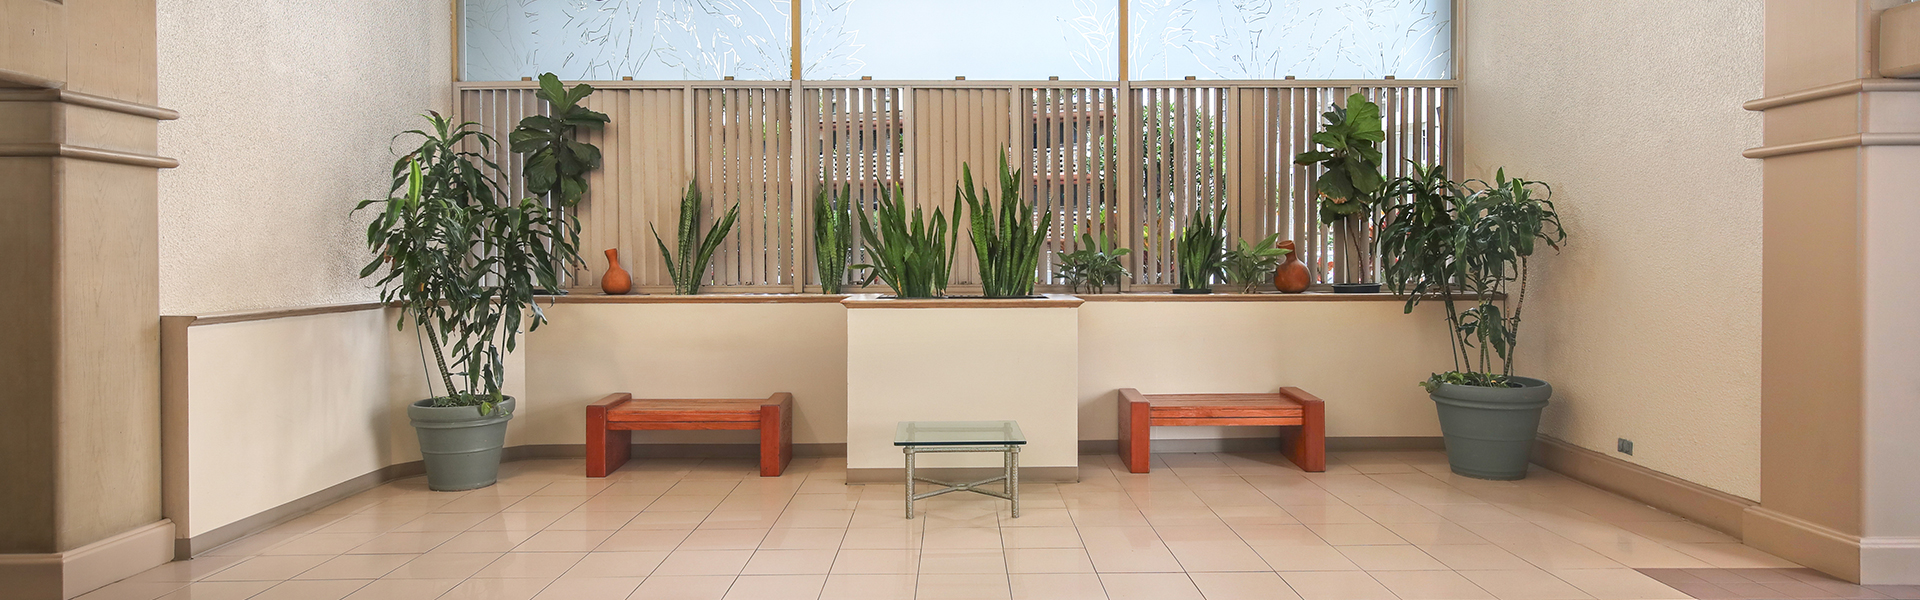 Lobby with bench seating and plants